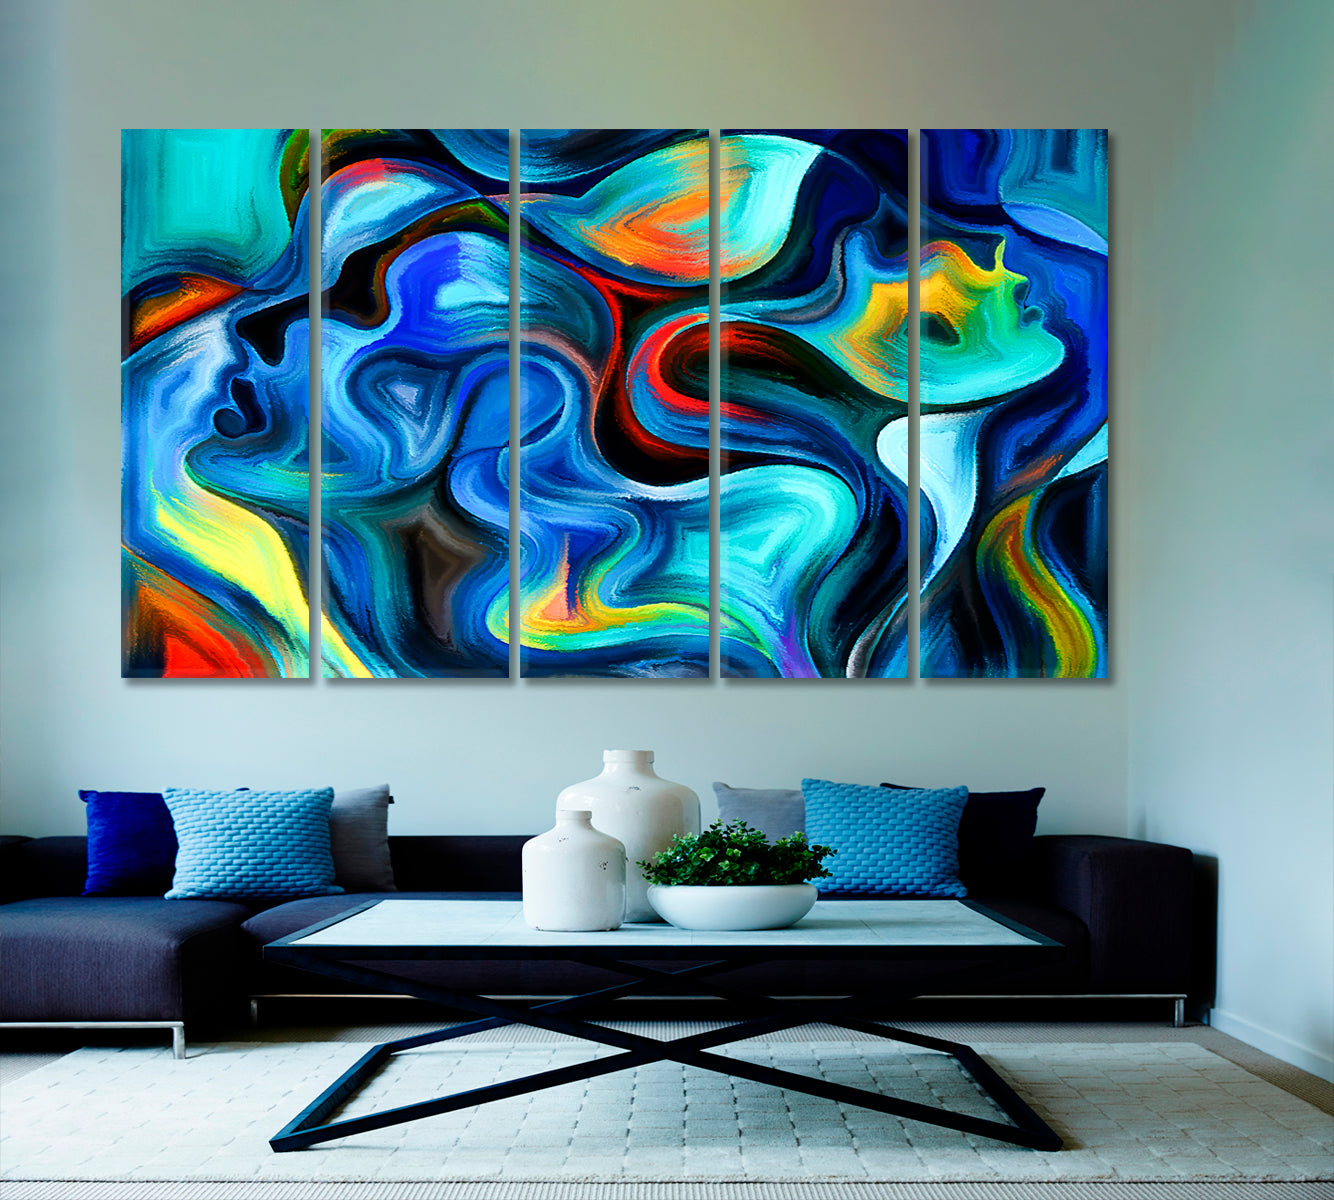 Unity, Surreal Human Profiles and Graceful Lines in Vivid Colors Consciousness Art Artesty 5 panels 36" x 24" 